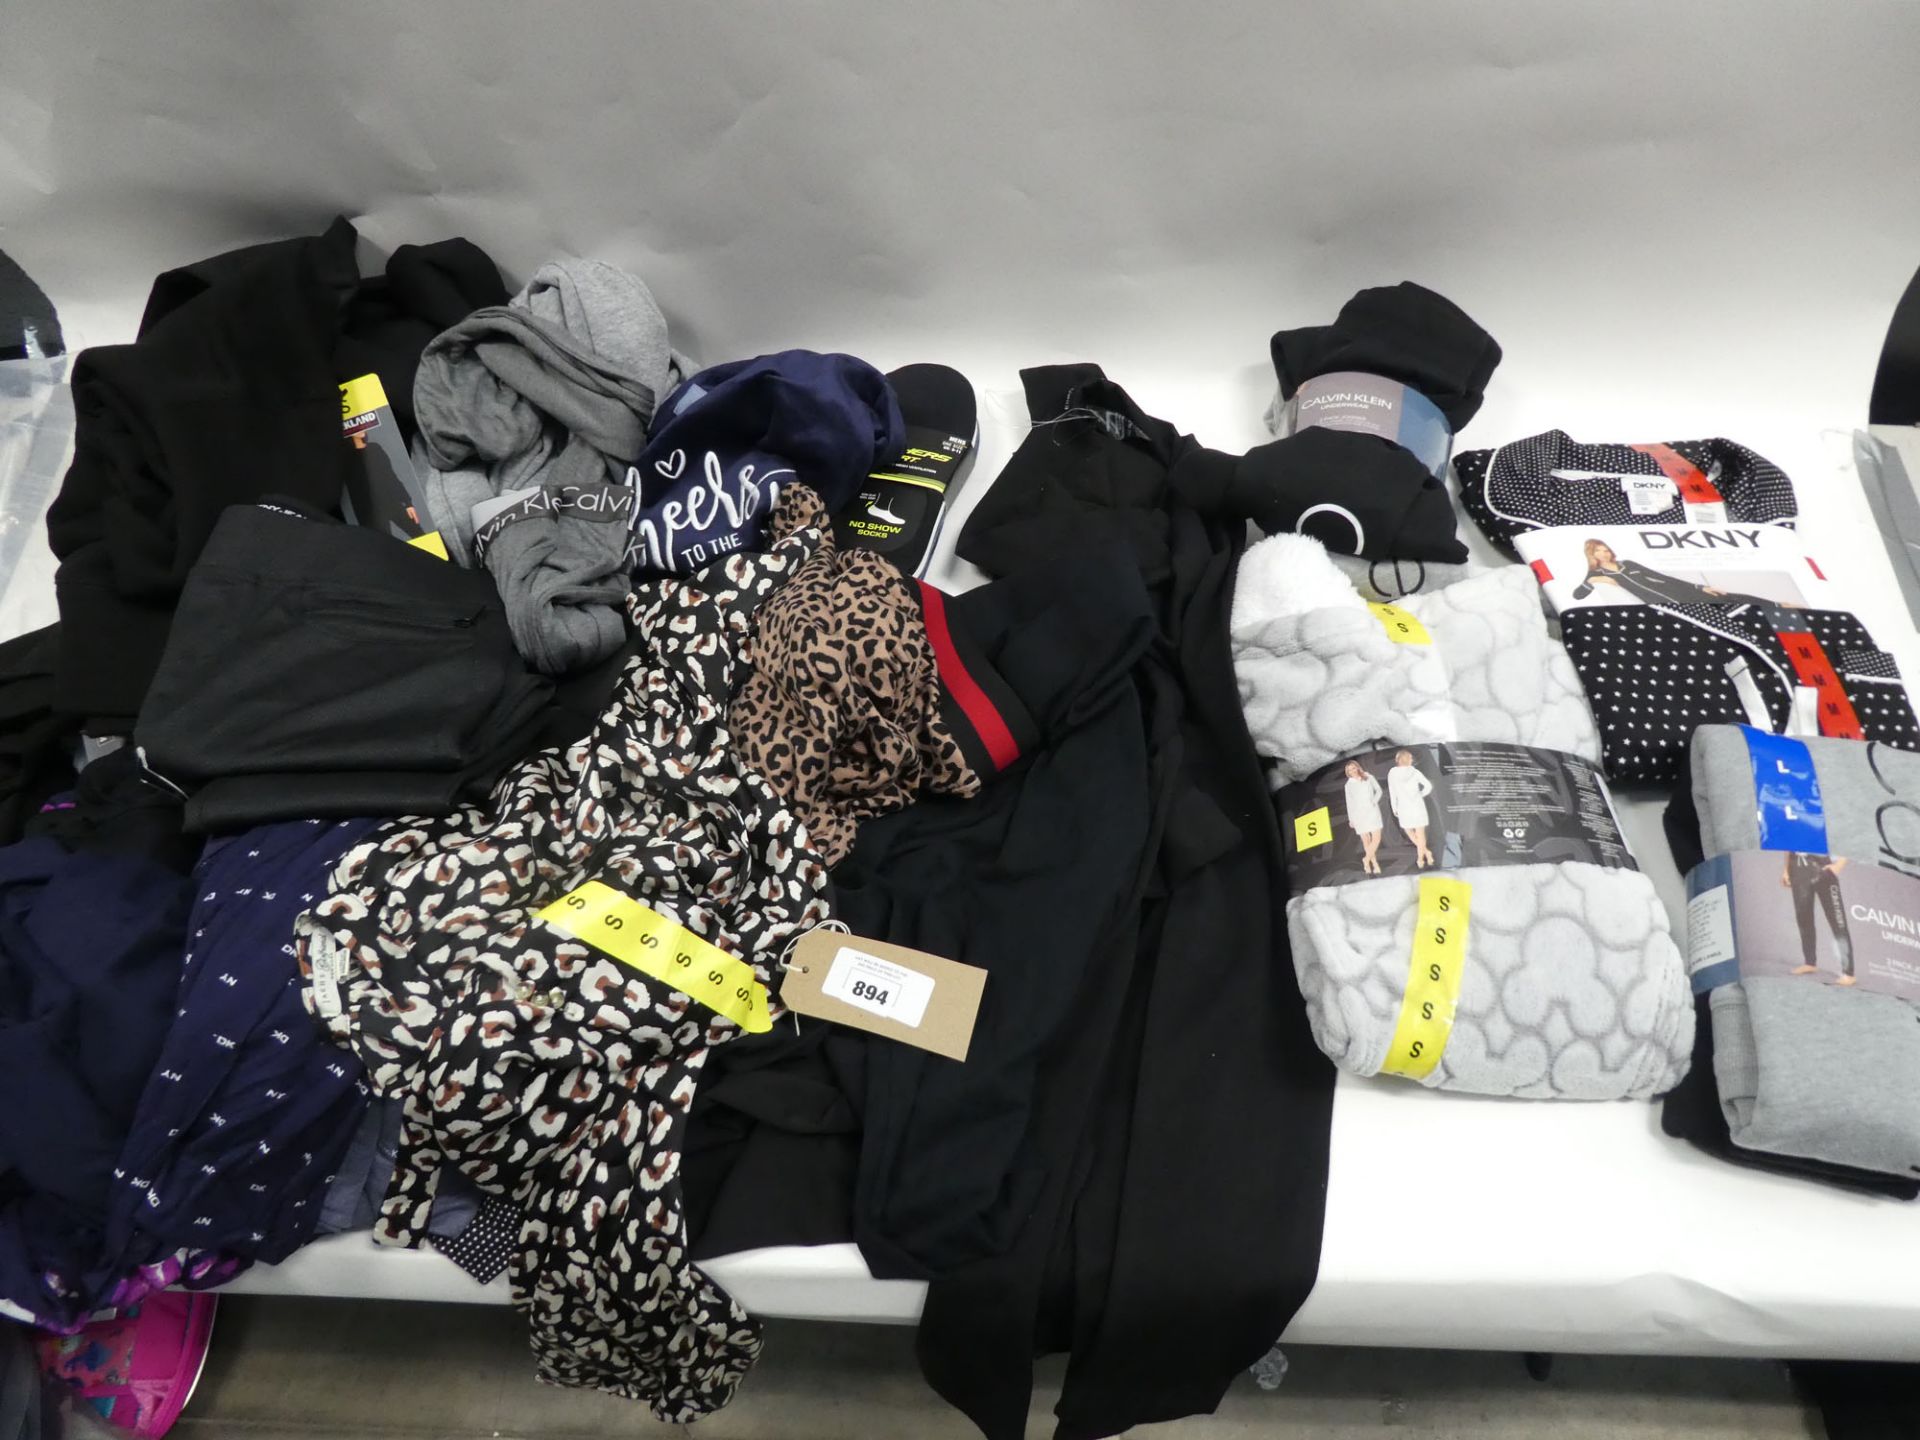 Selection of mixed ladies clothing to include Calvin Klein, DKNY, Rachel Roy, Sketches, etc - in